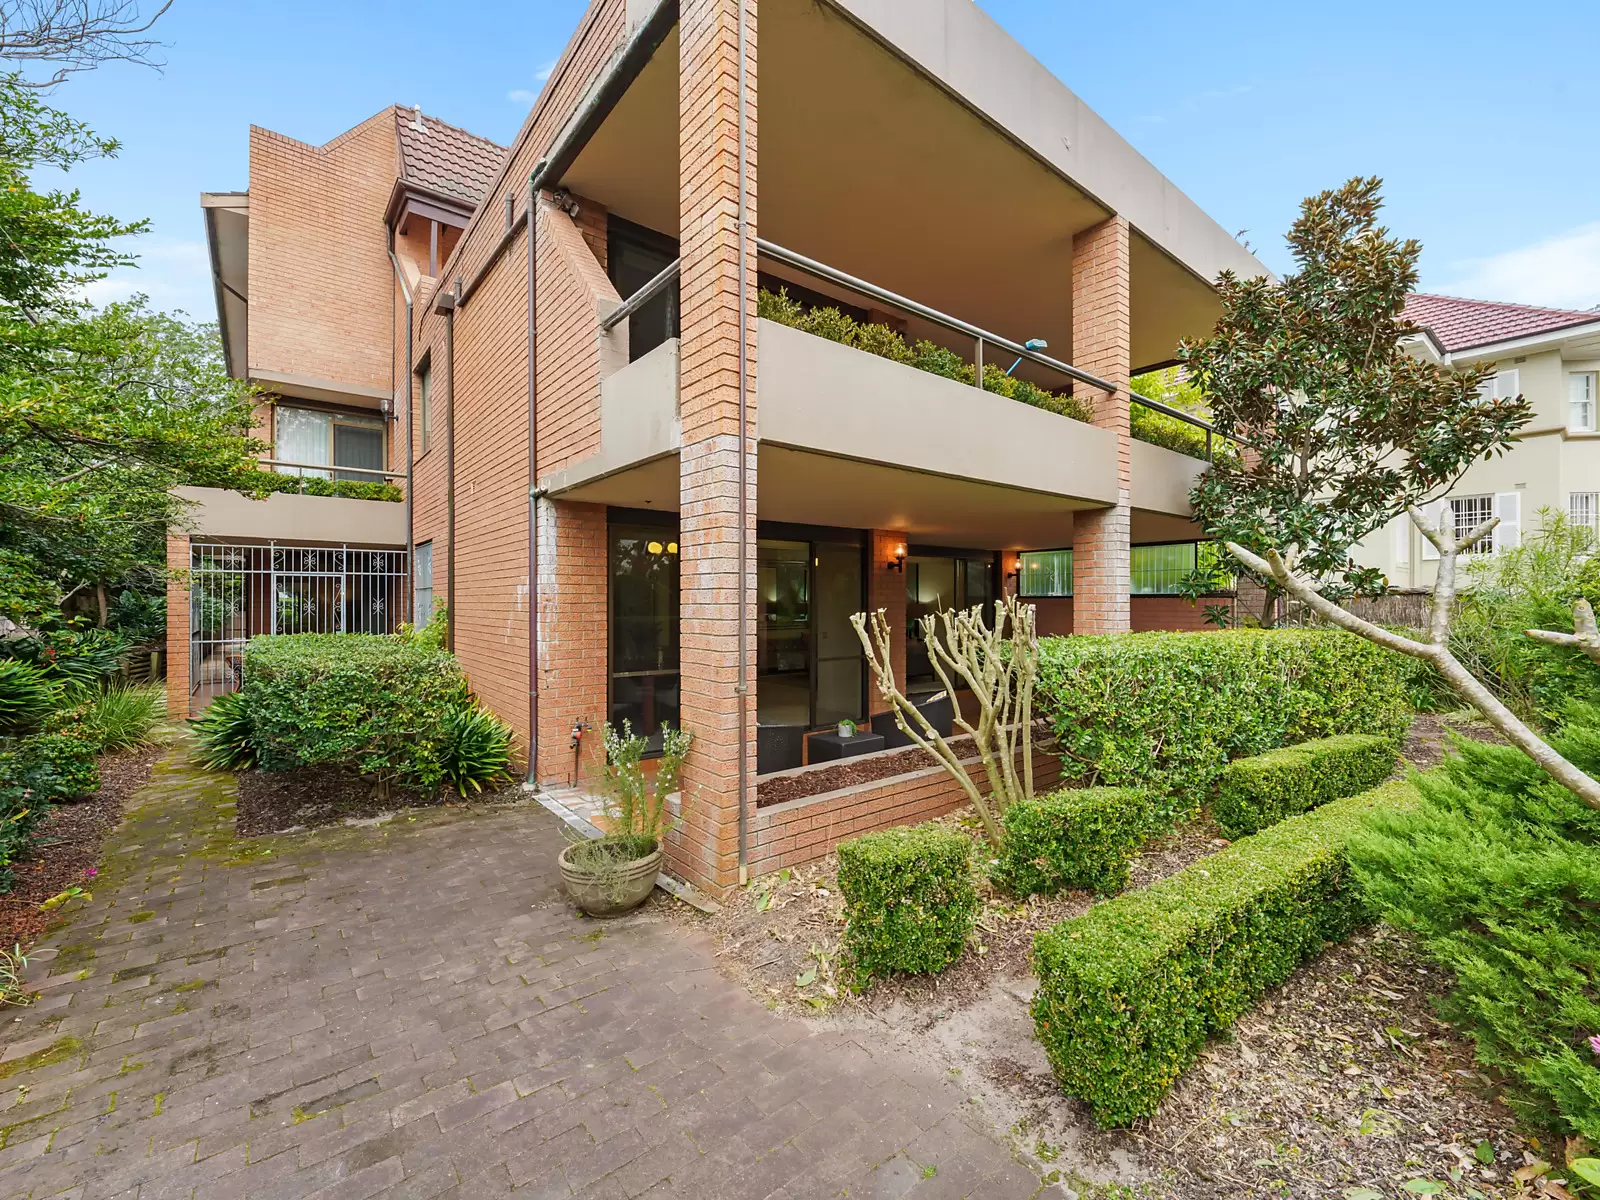 Photo #6: 1/16 Darling Point Road, Darling Point - Sold by Sydney Sotheby's International Realty